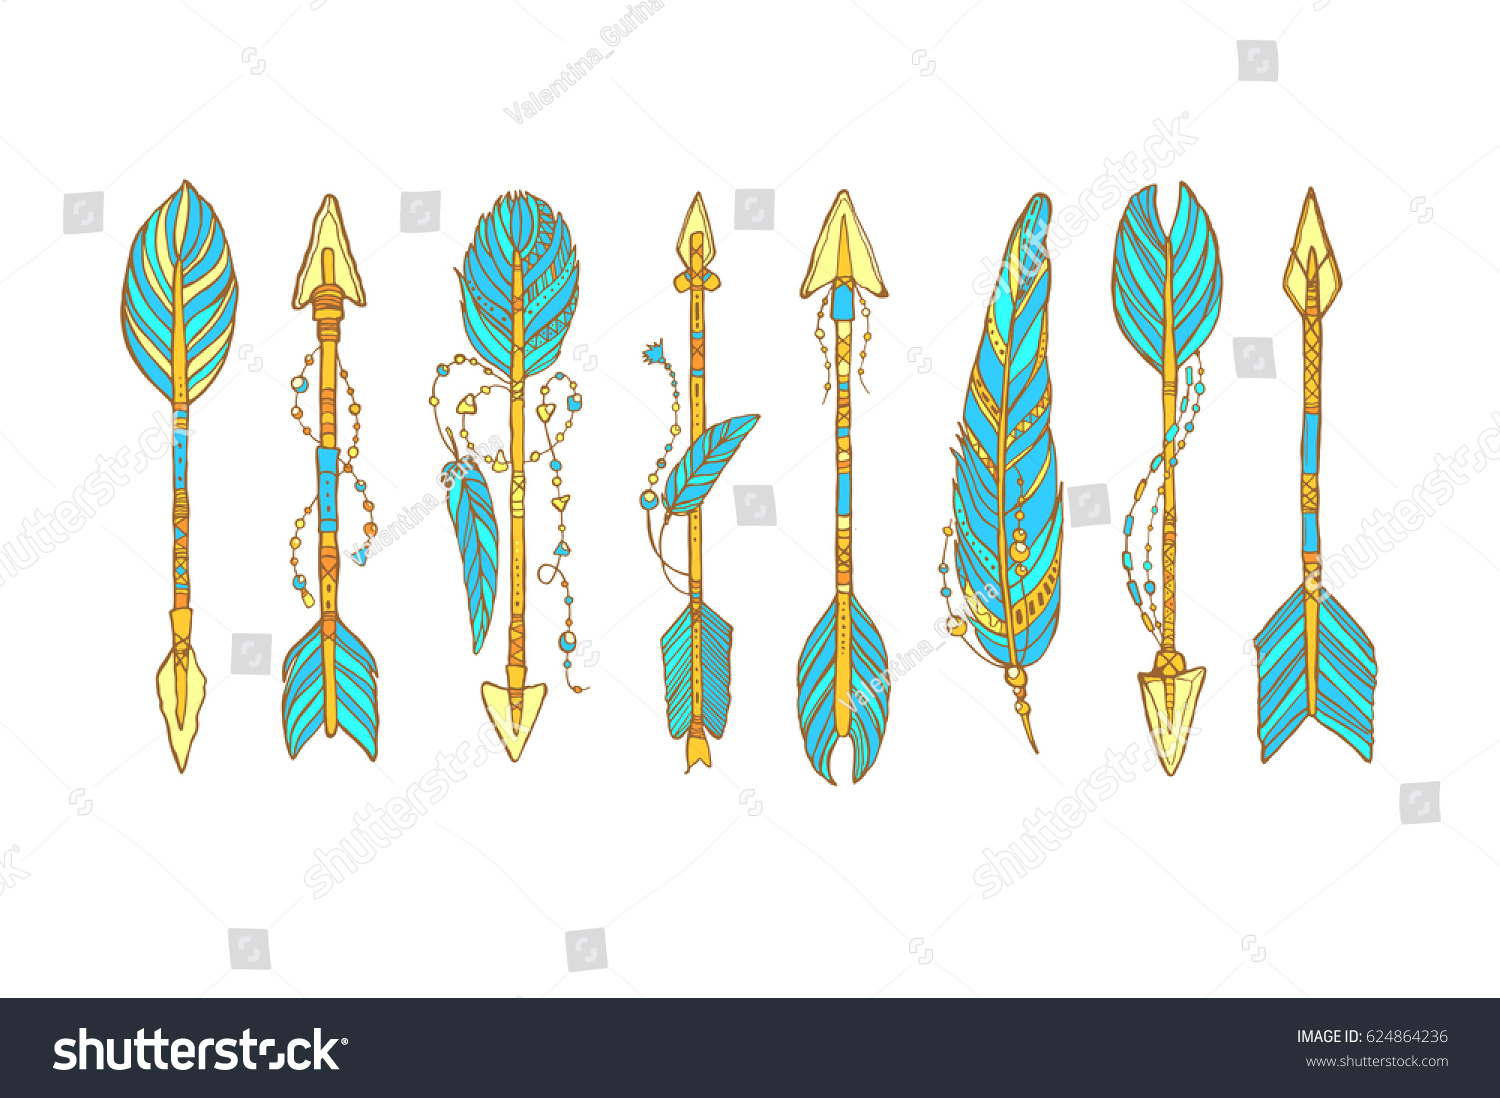 Double Toggle Switch 3dRose lsp_252965_2 Pretty Watercolor Tribal Arrows With Girl Tribe 